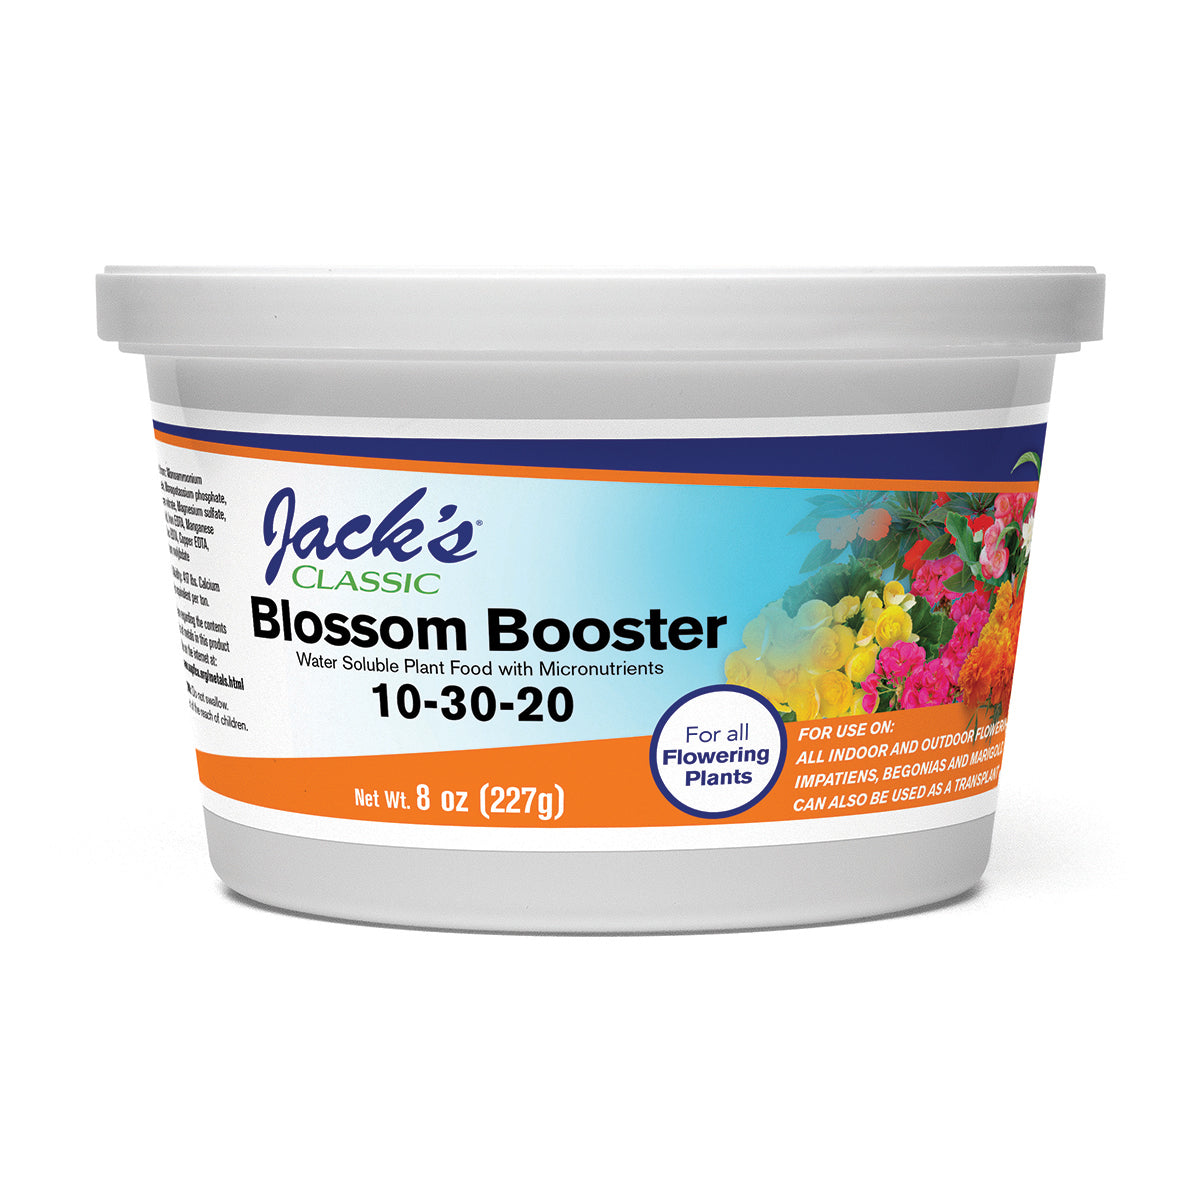 Jack's Classic Blossom Booster 10-30-20 8 oz